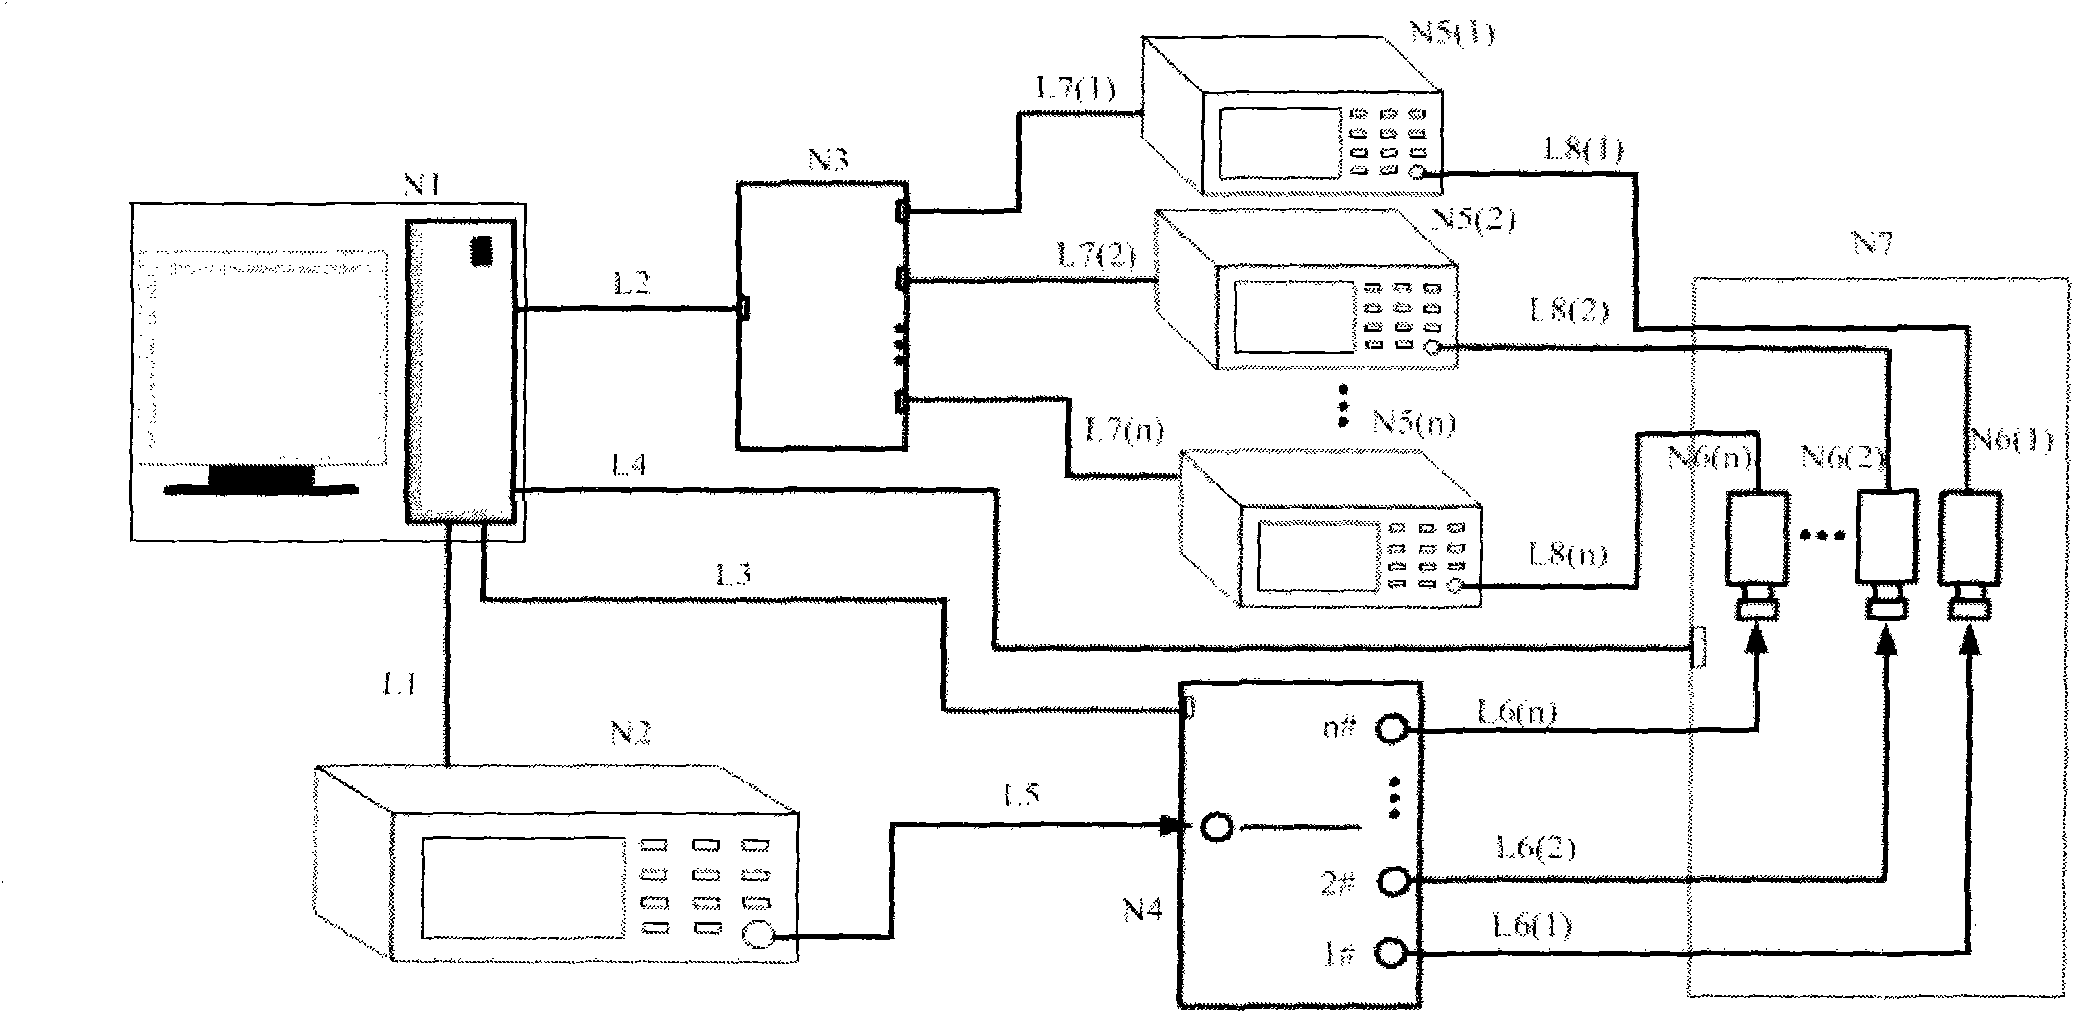 Microwave power probe temperature compensation device based on USB interface